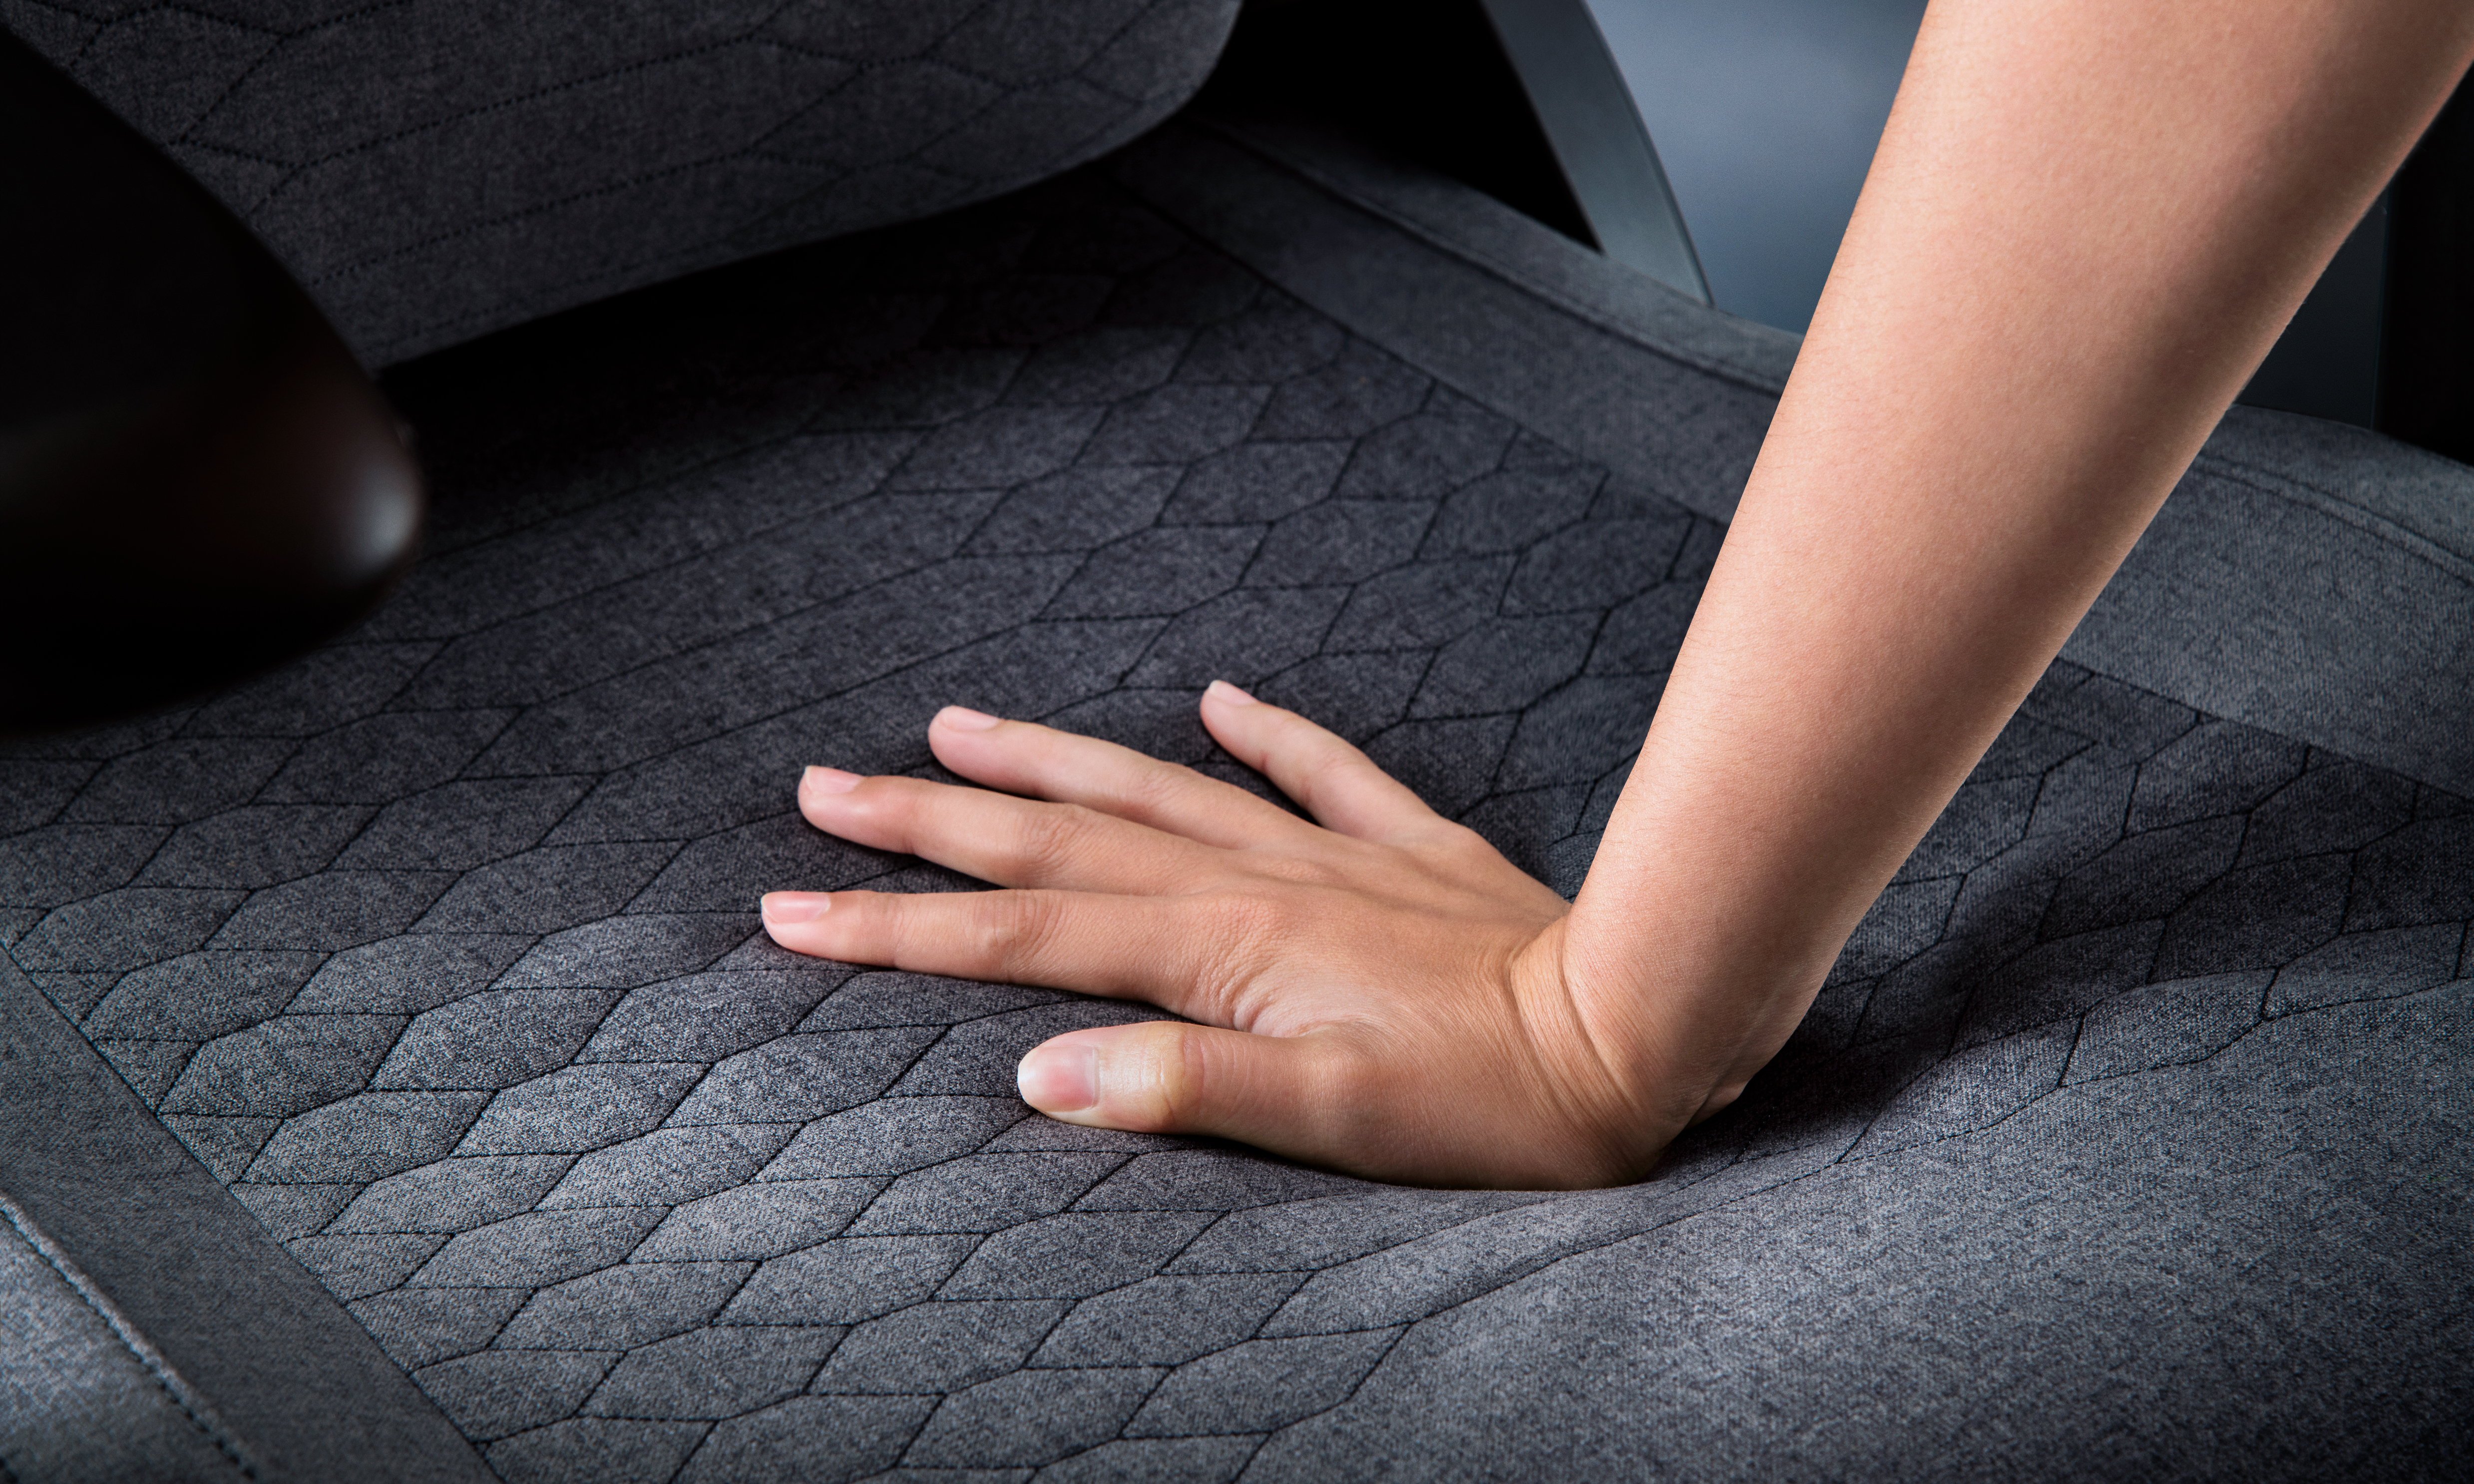 Product marketing photos show a person's palm pressed against a comfortable-looking seat with gray patterns. Close-up of chair seat.